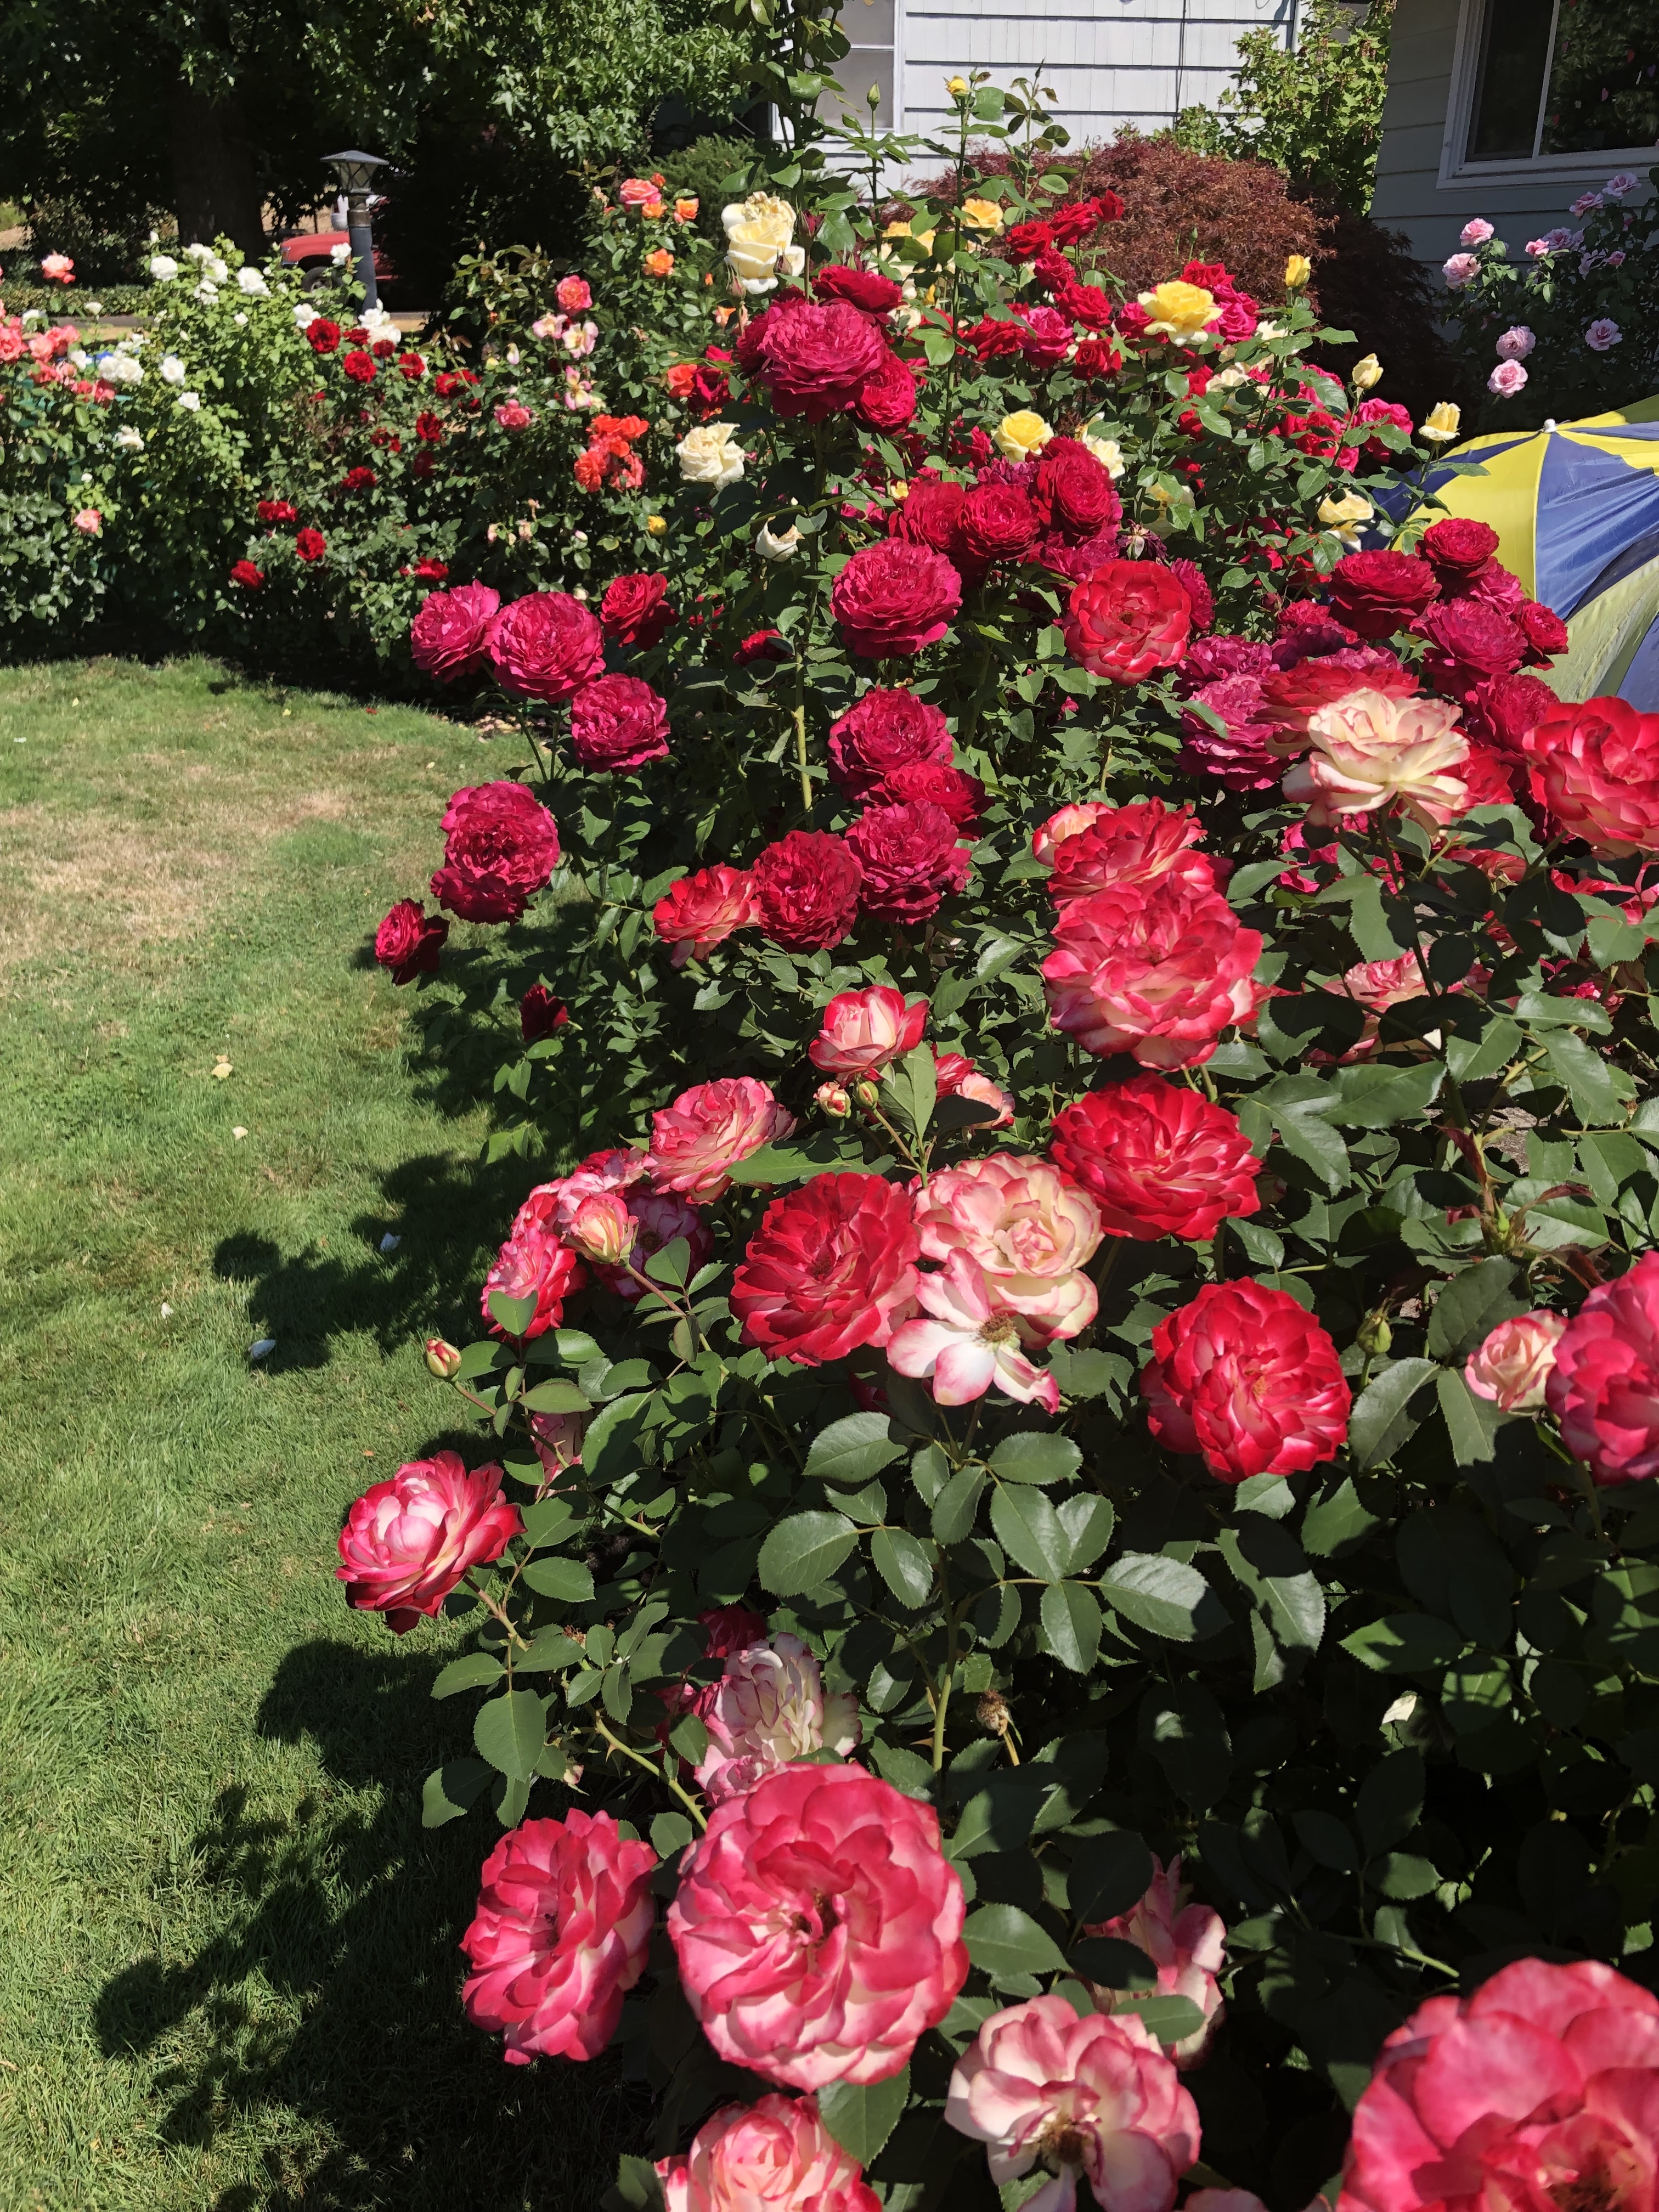 The 2023 Portland Rose Festival's official rose is 'Smiles for